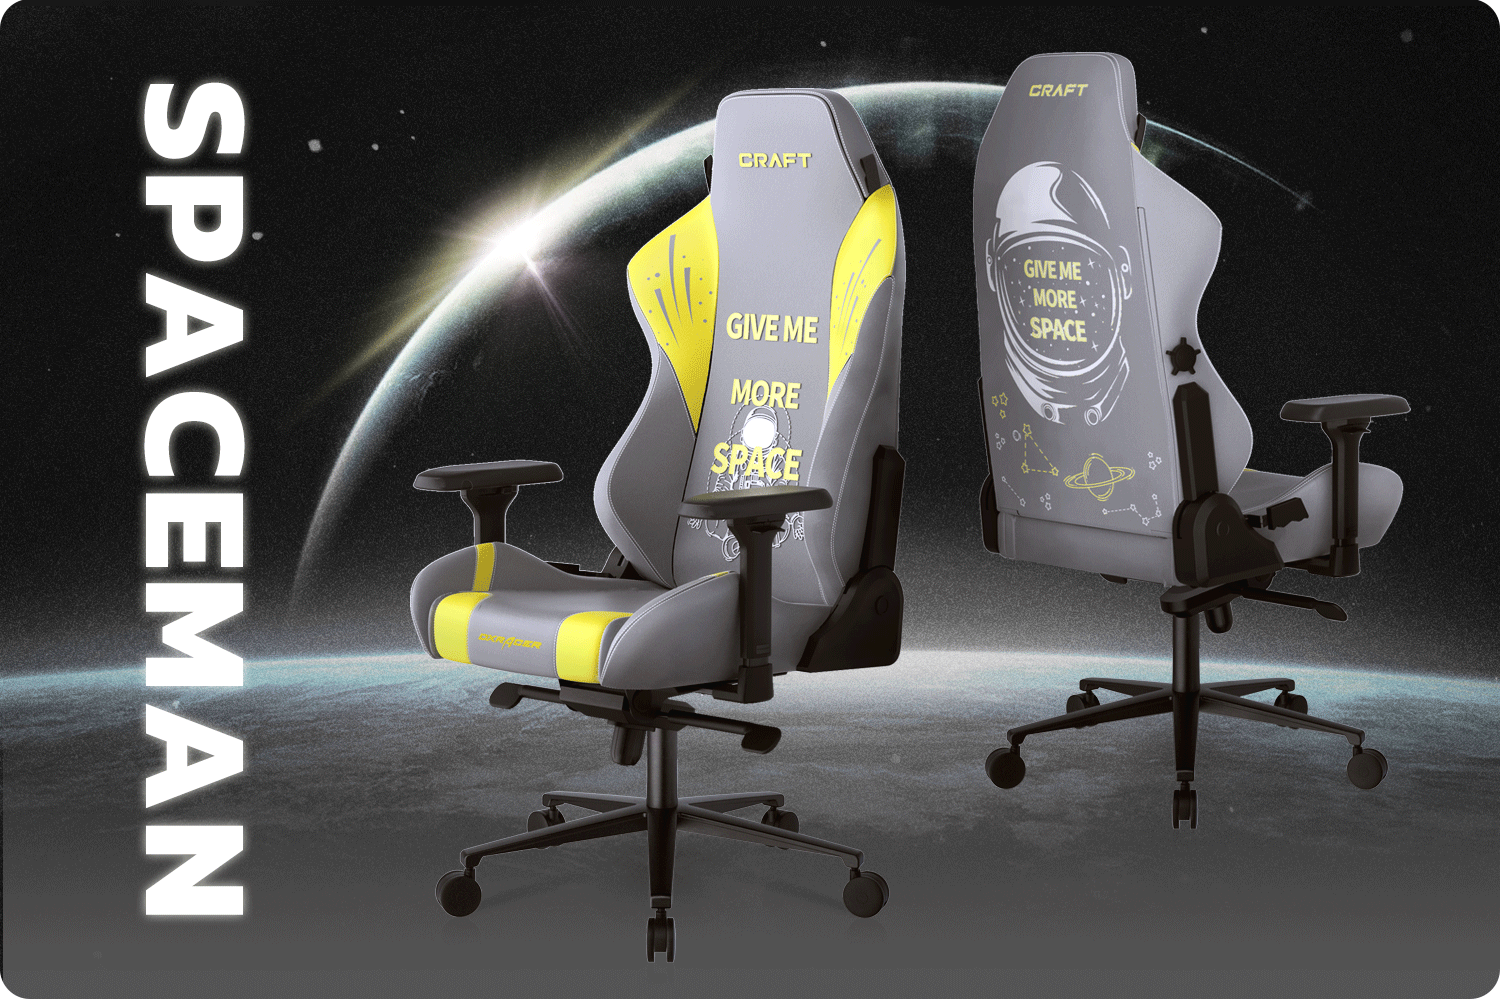 https://www.thexboxhub.com/wp-content/uploads/2022/03/dxracer-craft-series-spaceman.png